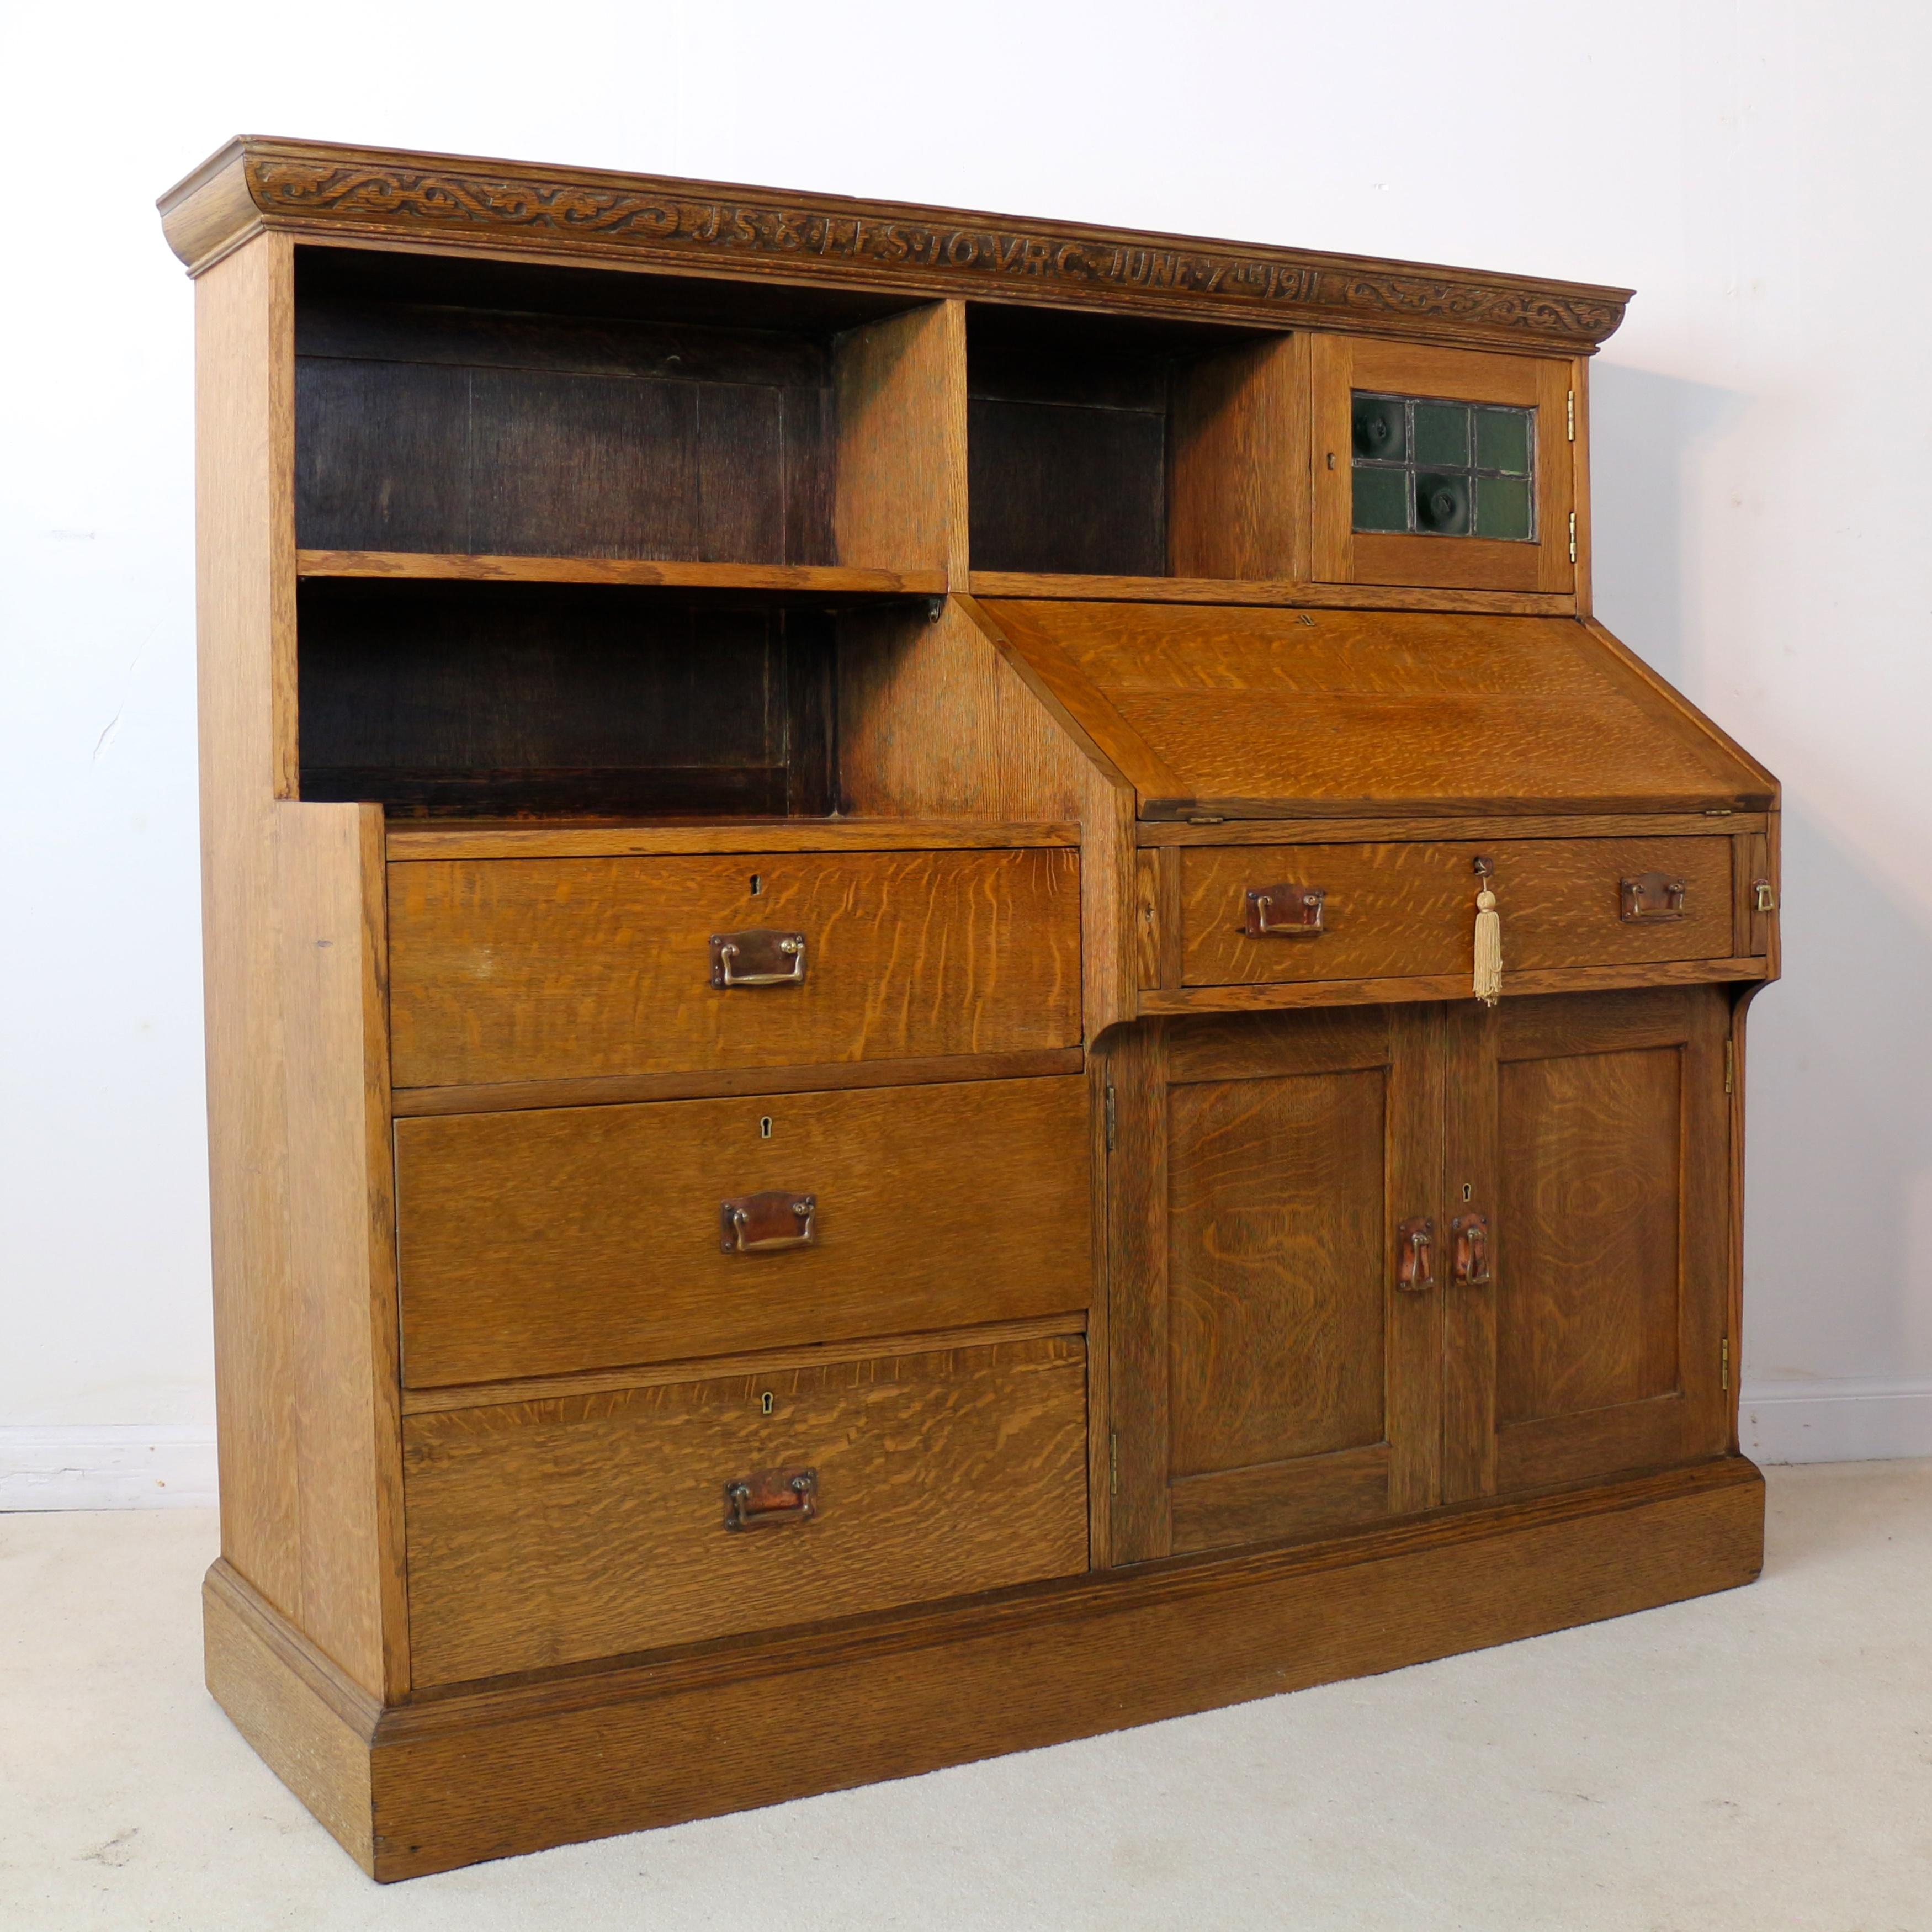 Antique English Arts & Crafts Oak Bureau Bookcase Attributed to Liberty & Co For Sale 7